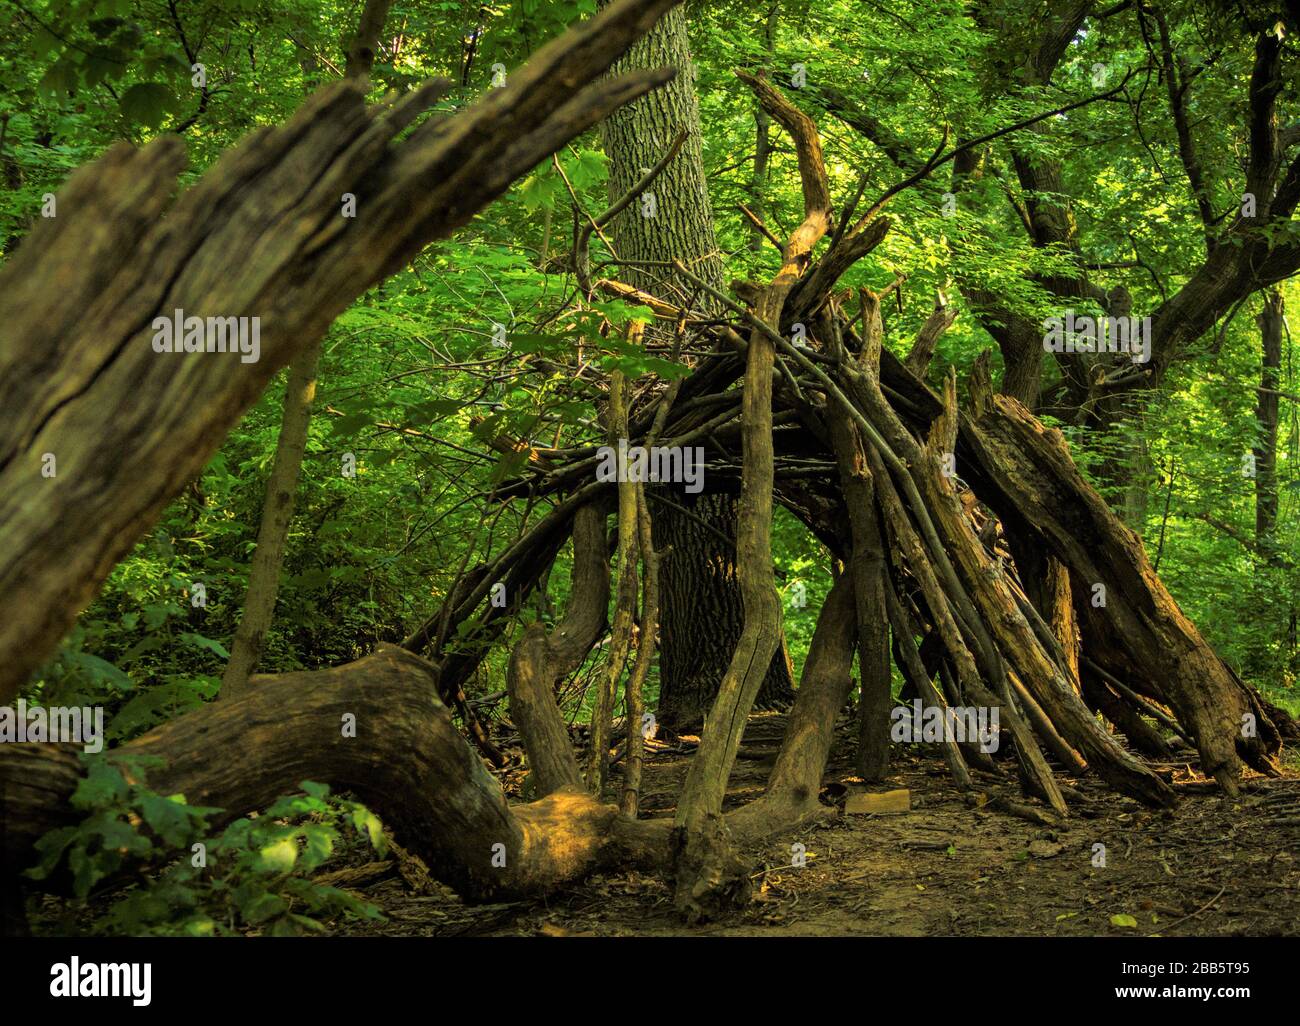 Hut made of branches in the woods. Stock Photo